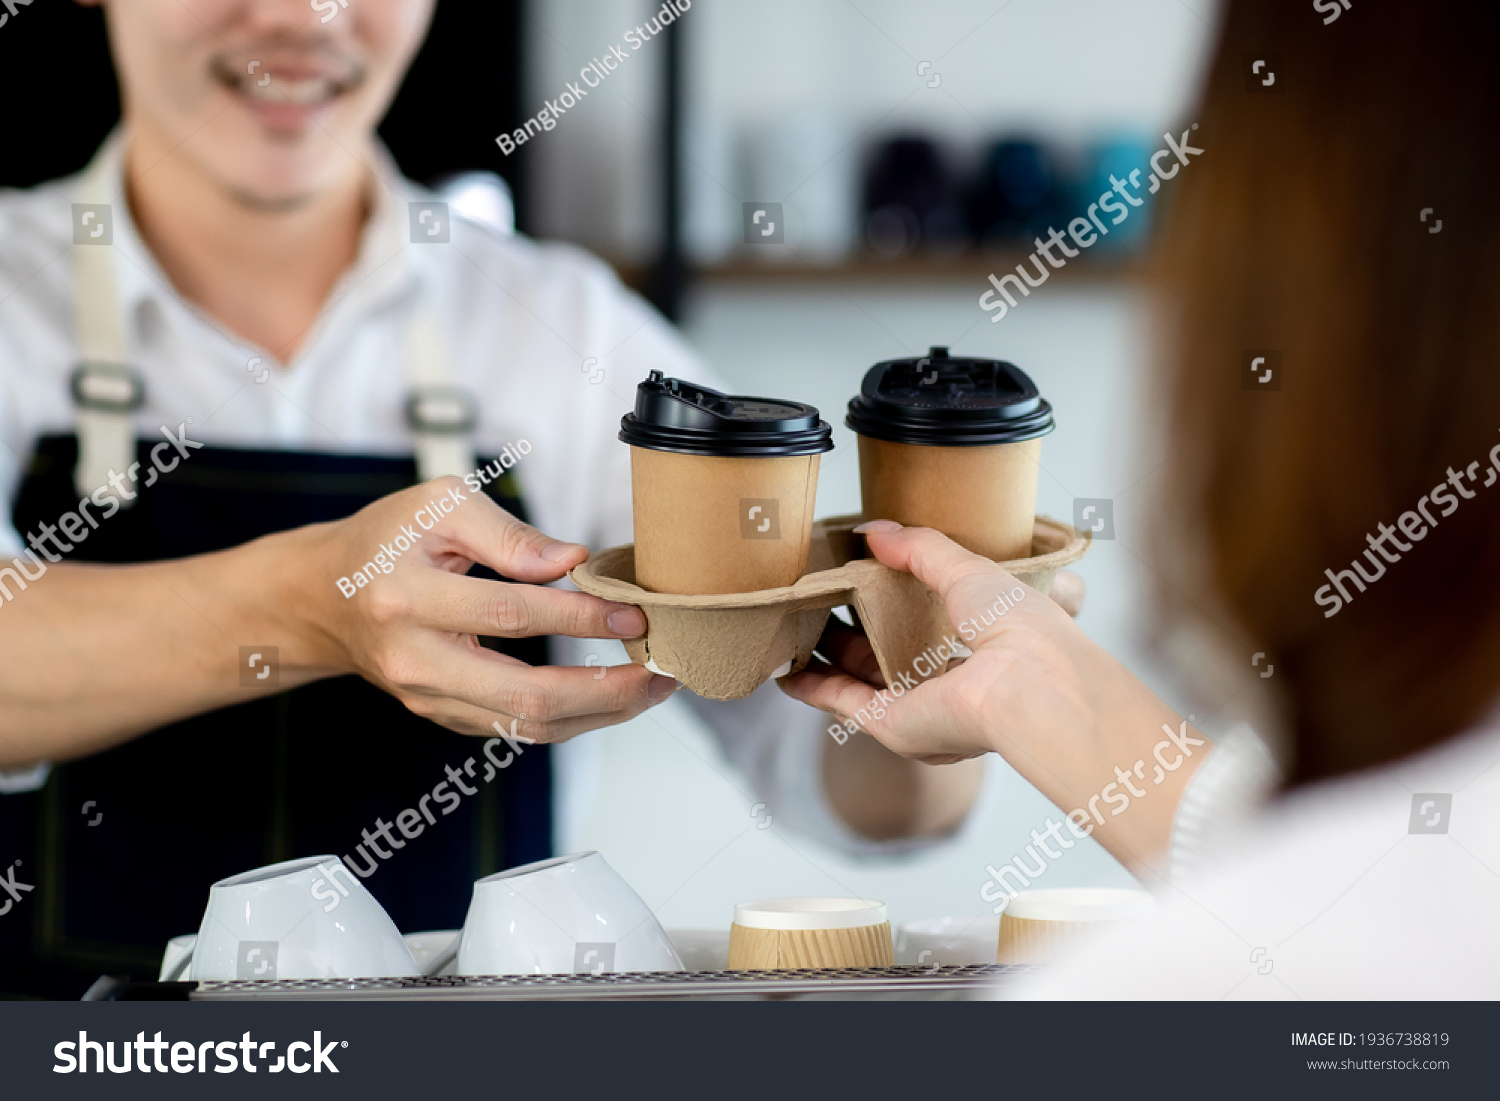 Close up hand. Asian young man or bartender serving paper coffee glass customer at coffee shop. making coffee in cafe. Concept sale paper bag and coffee. maker machine with portafilter #1936738819